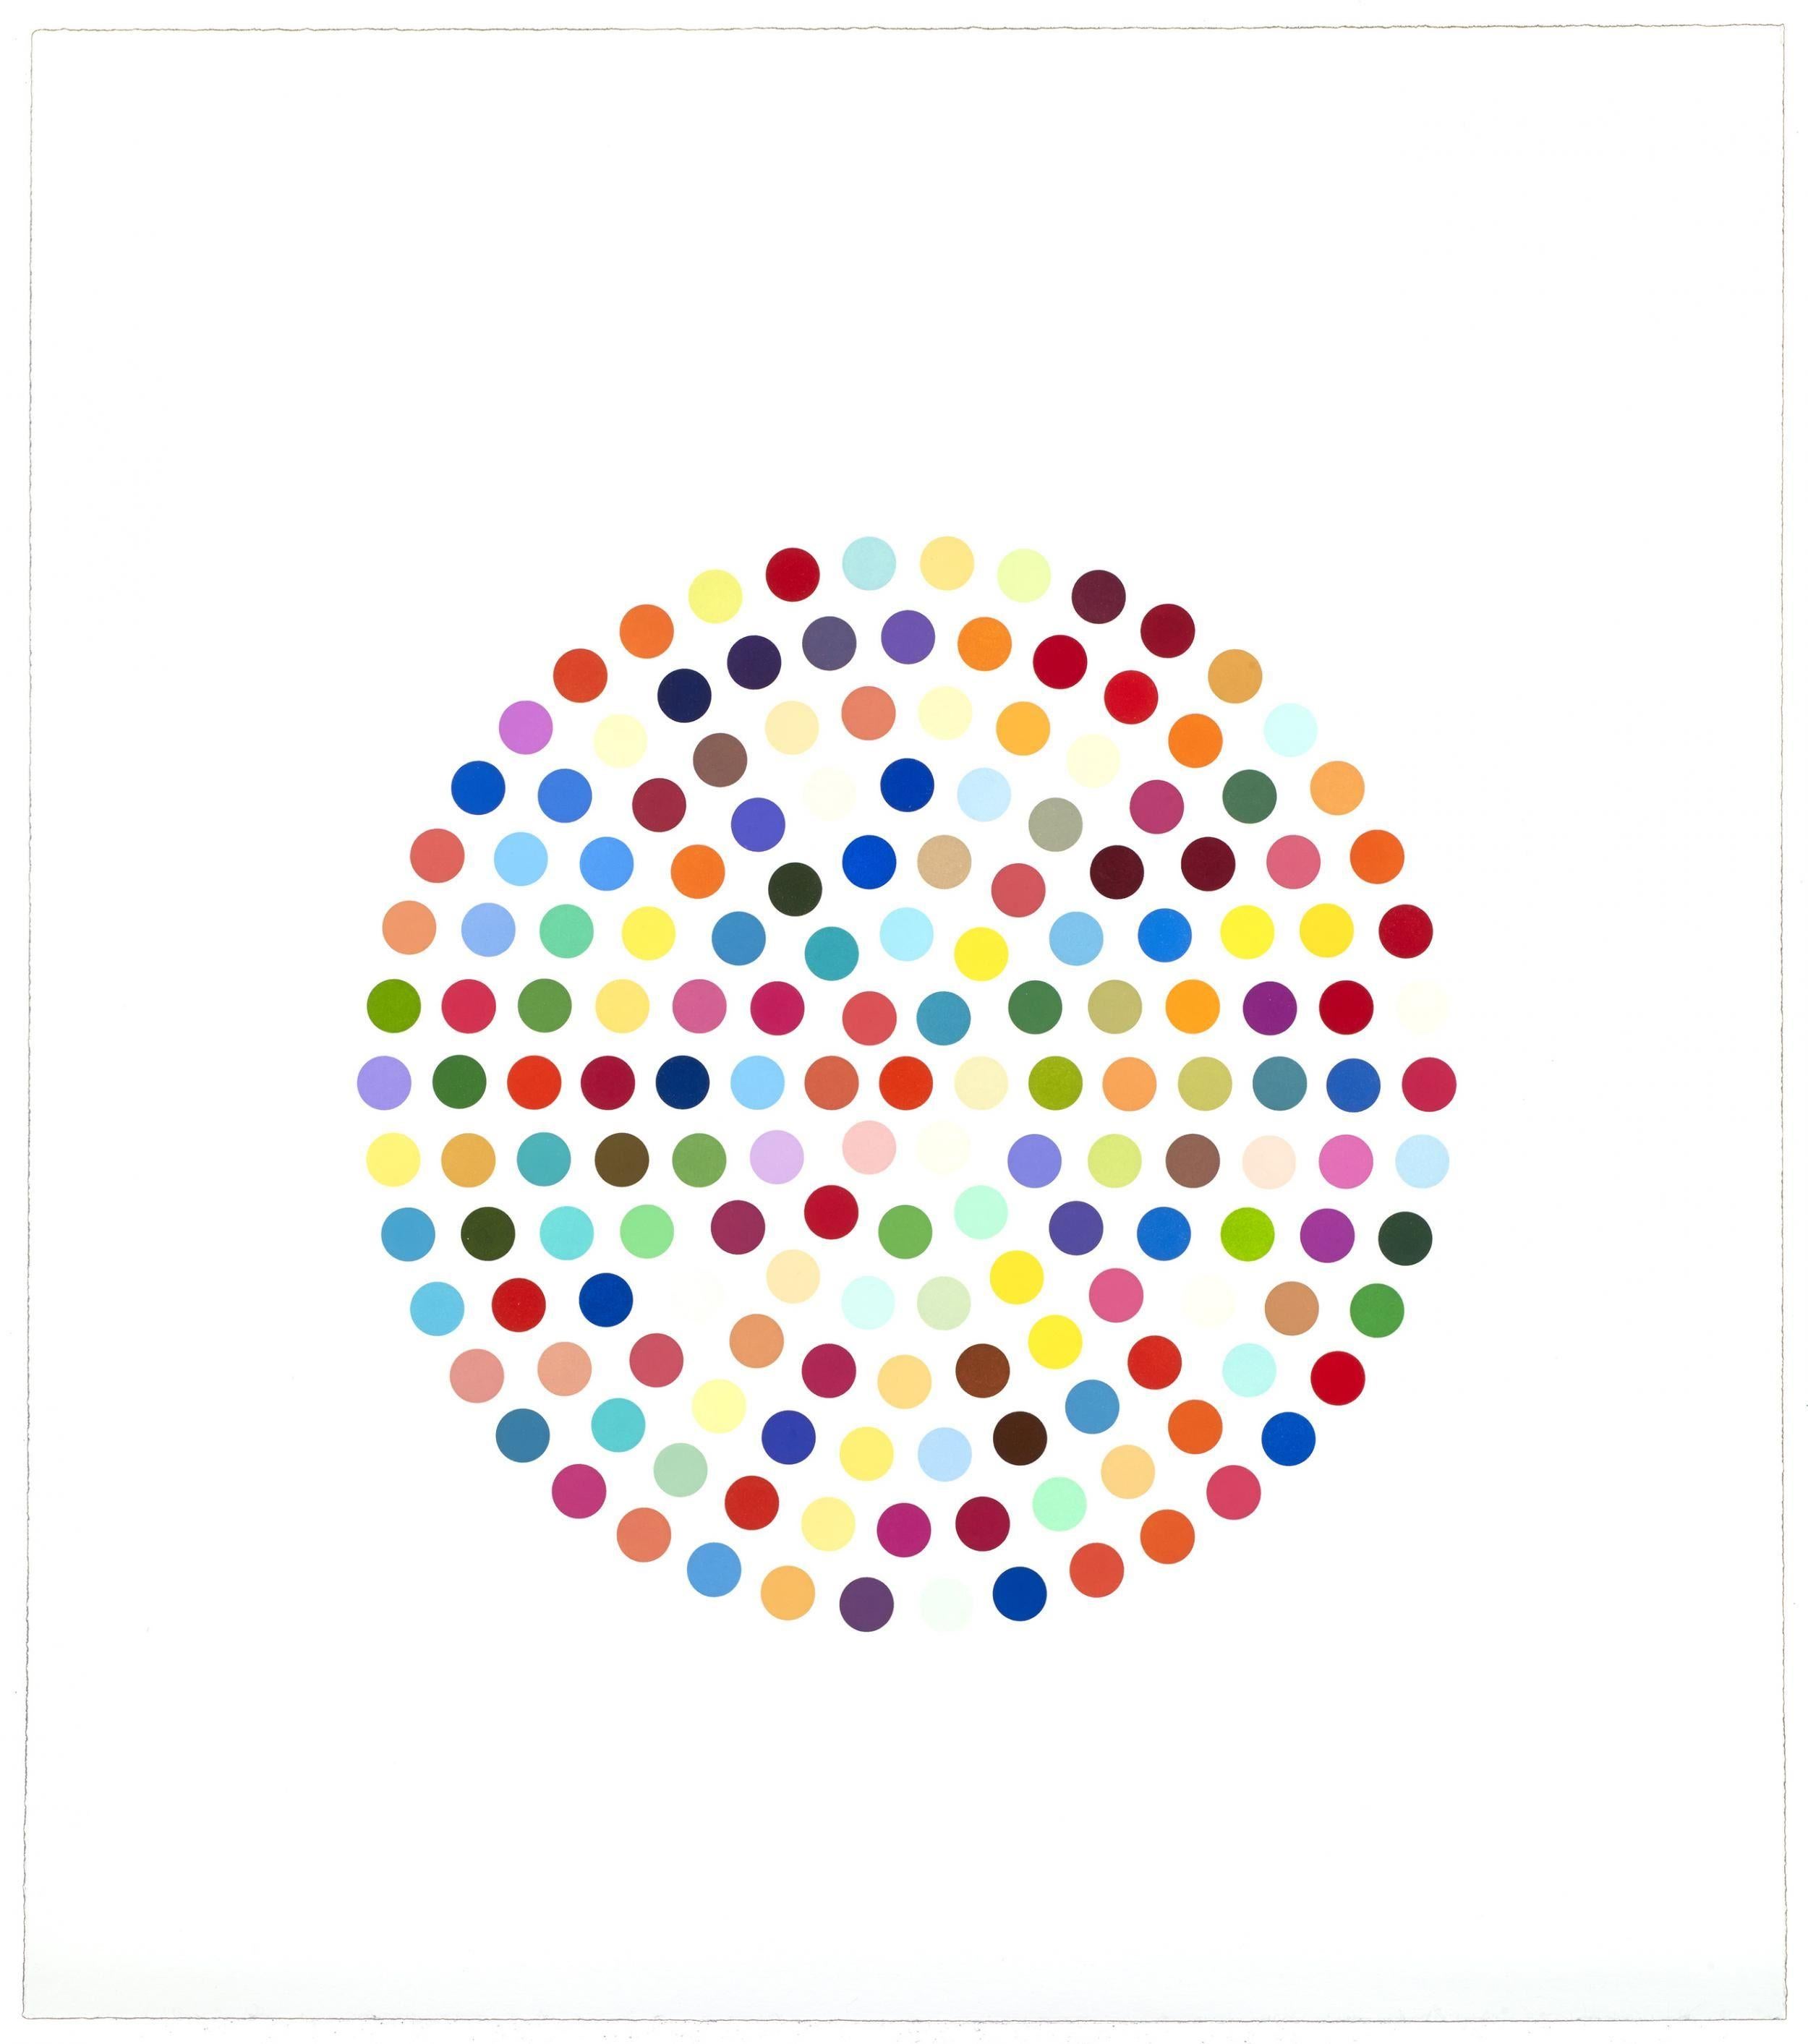 Abstract Print Damien Hirst - Céphalothine